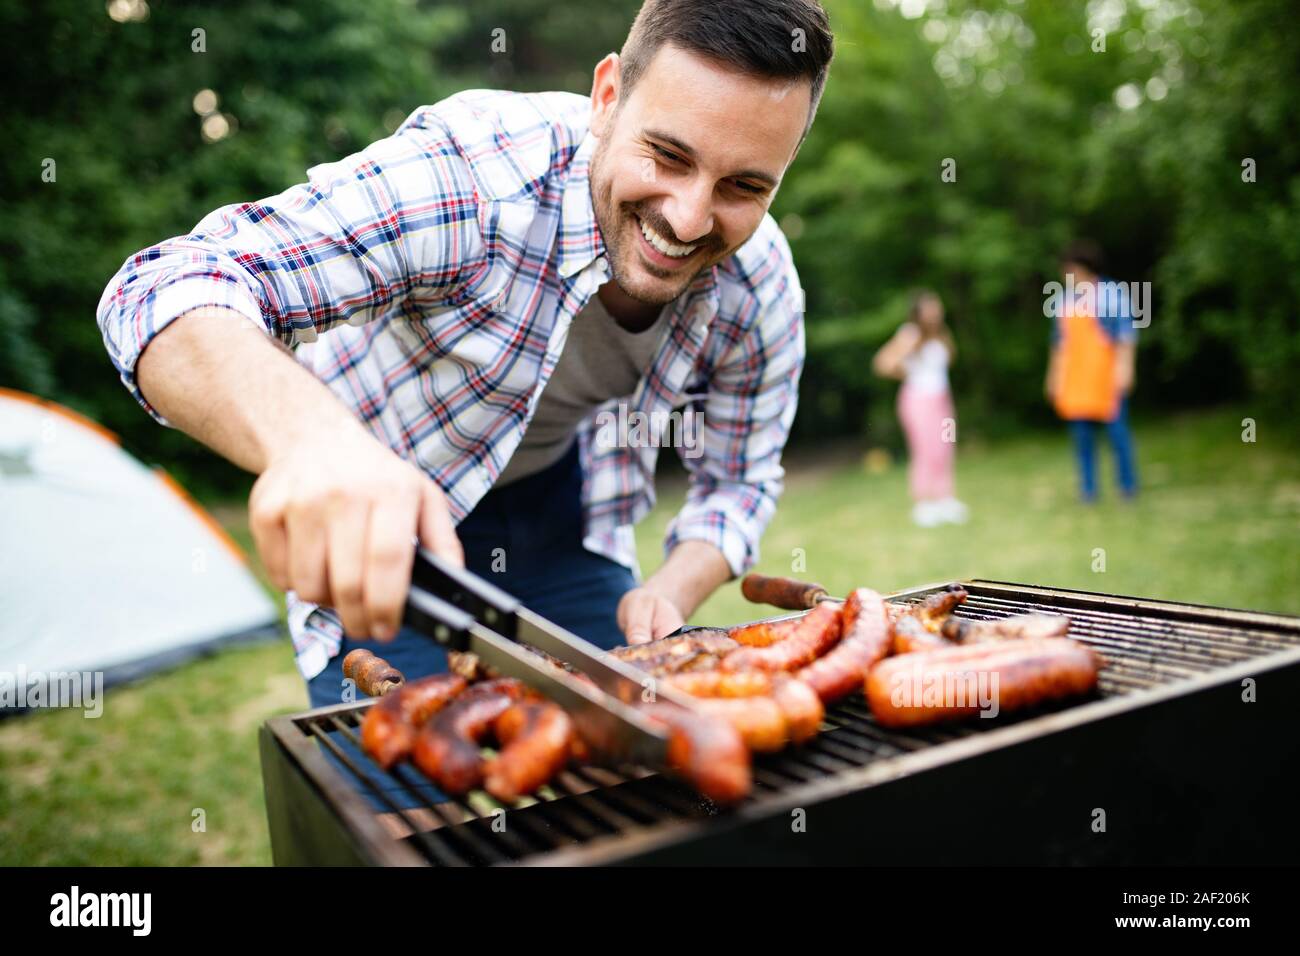 Overleg privaat het winkelcentrum Man cooking meat on barbecue grill at outdoor summer party Stock Photo -  Alamy